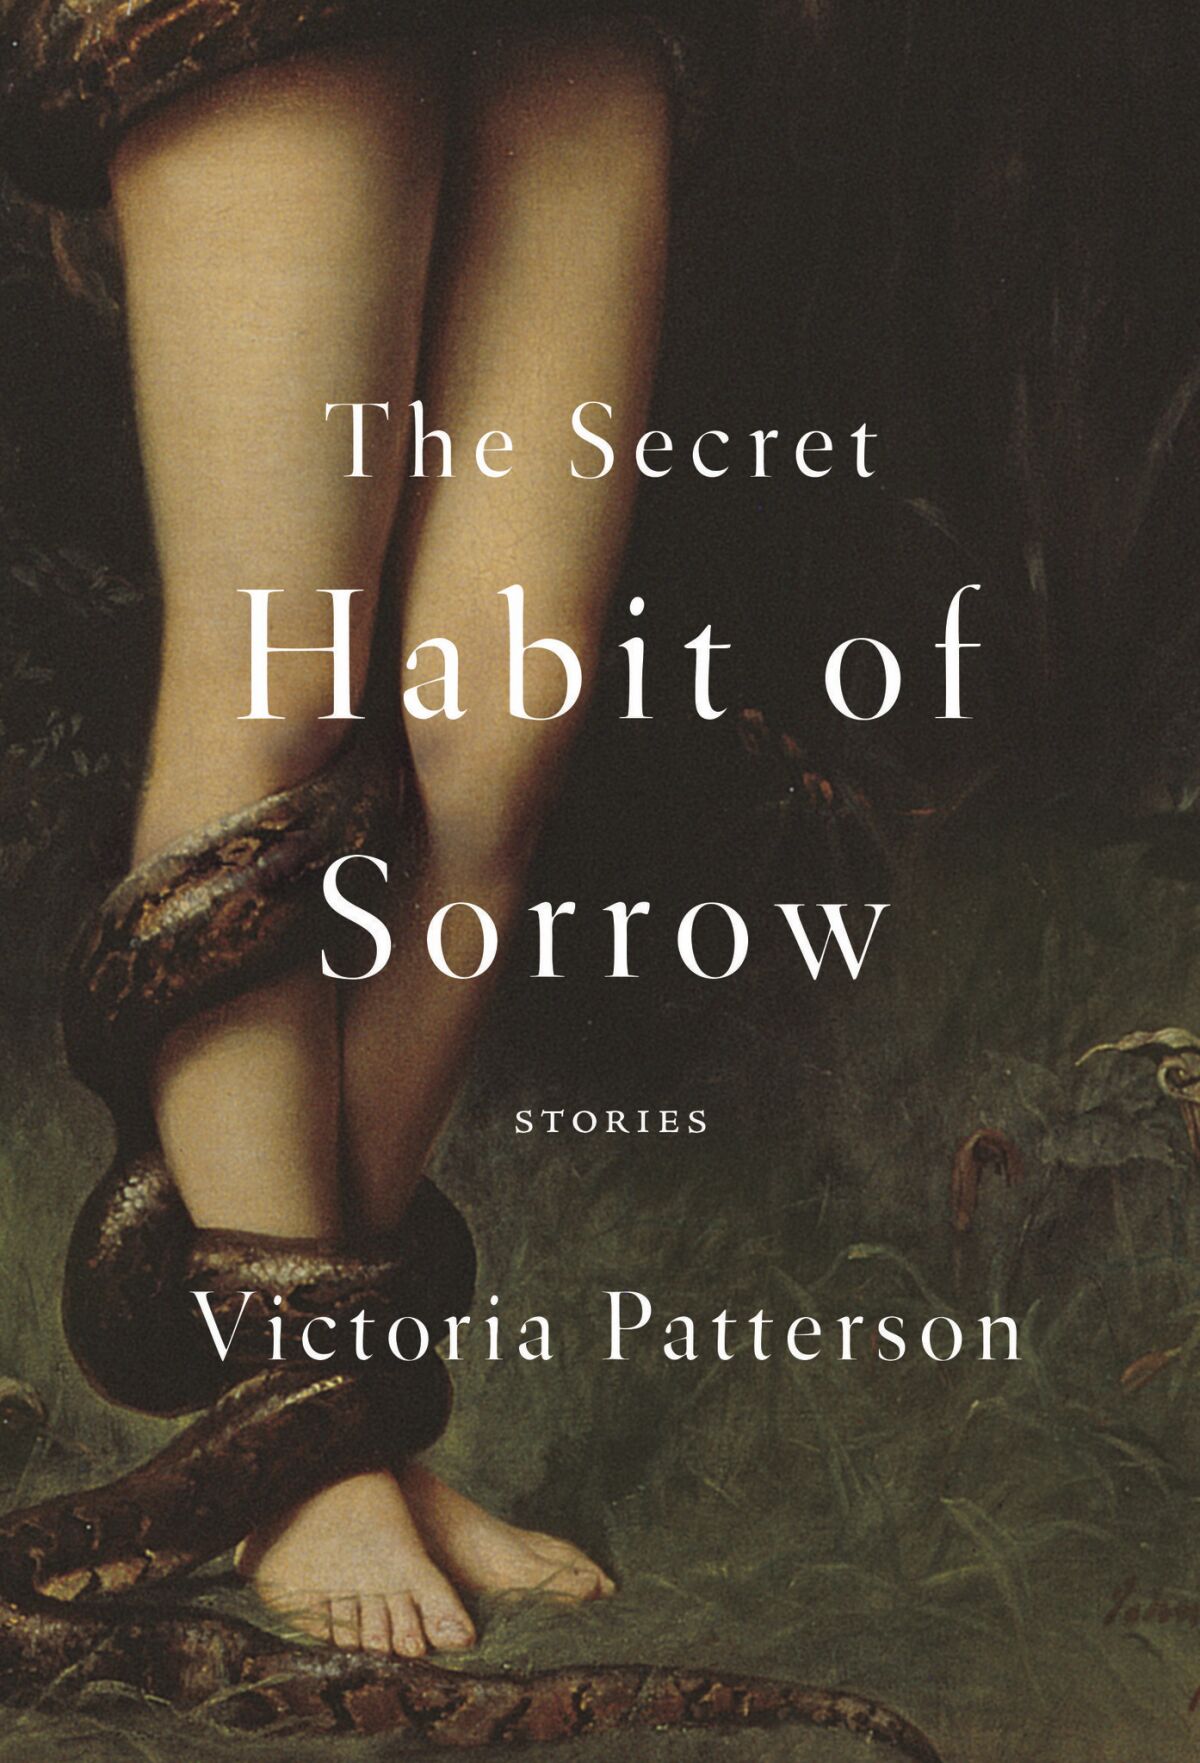 'The Secret Habit of Sorrow: Stories' by Victoria Patterson